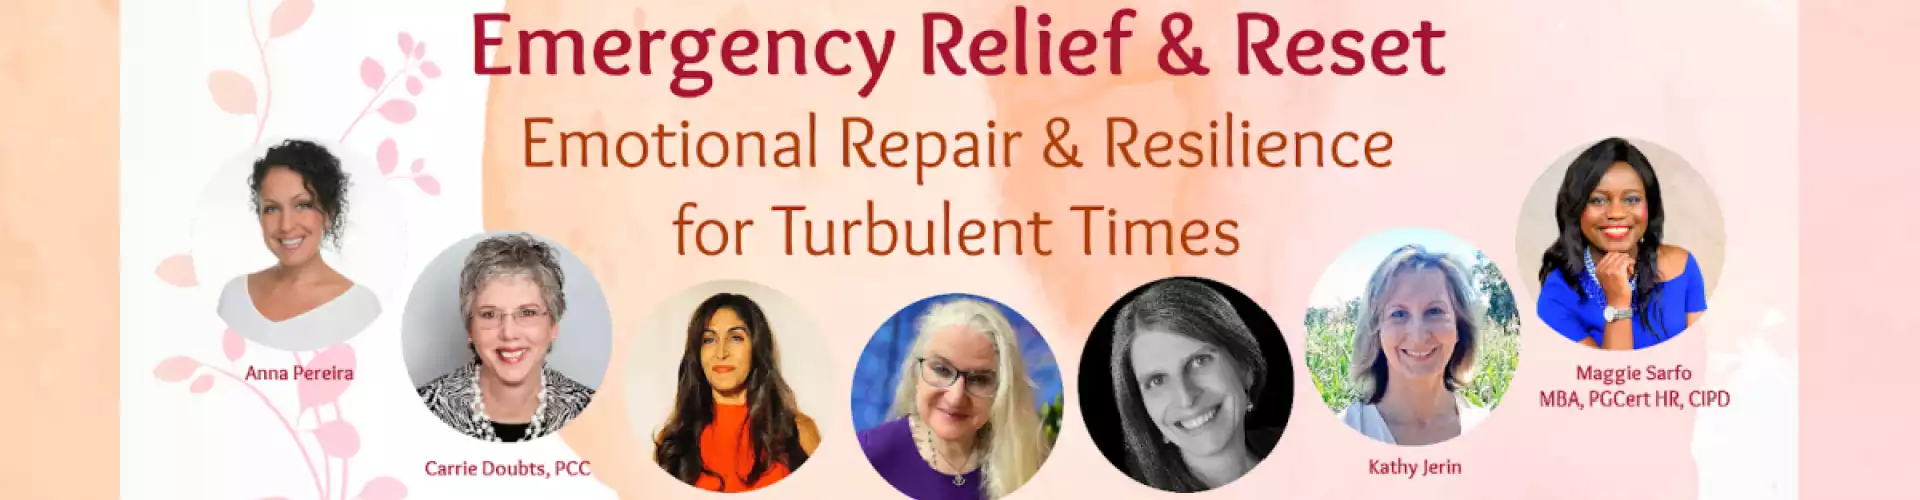 Emergency Relief & Reset, Emotional Repair & Resilience for Turbulent Times